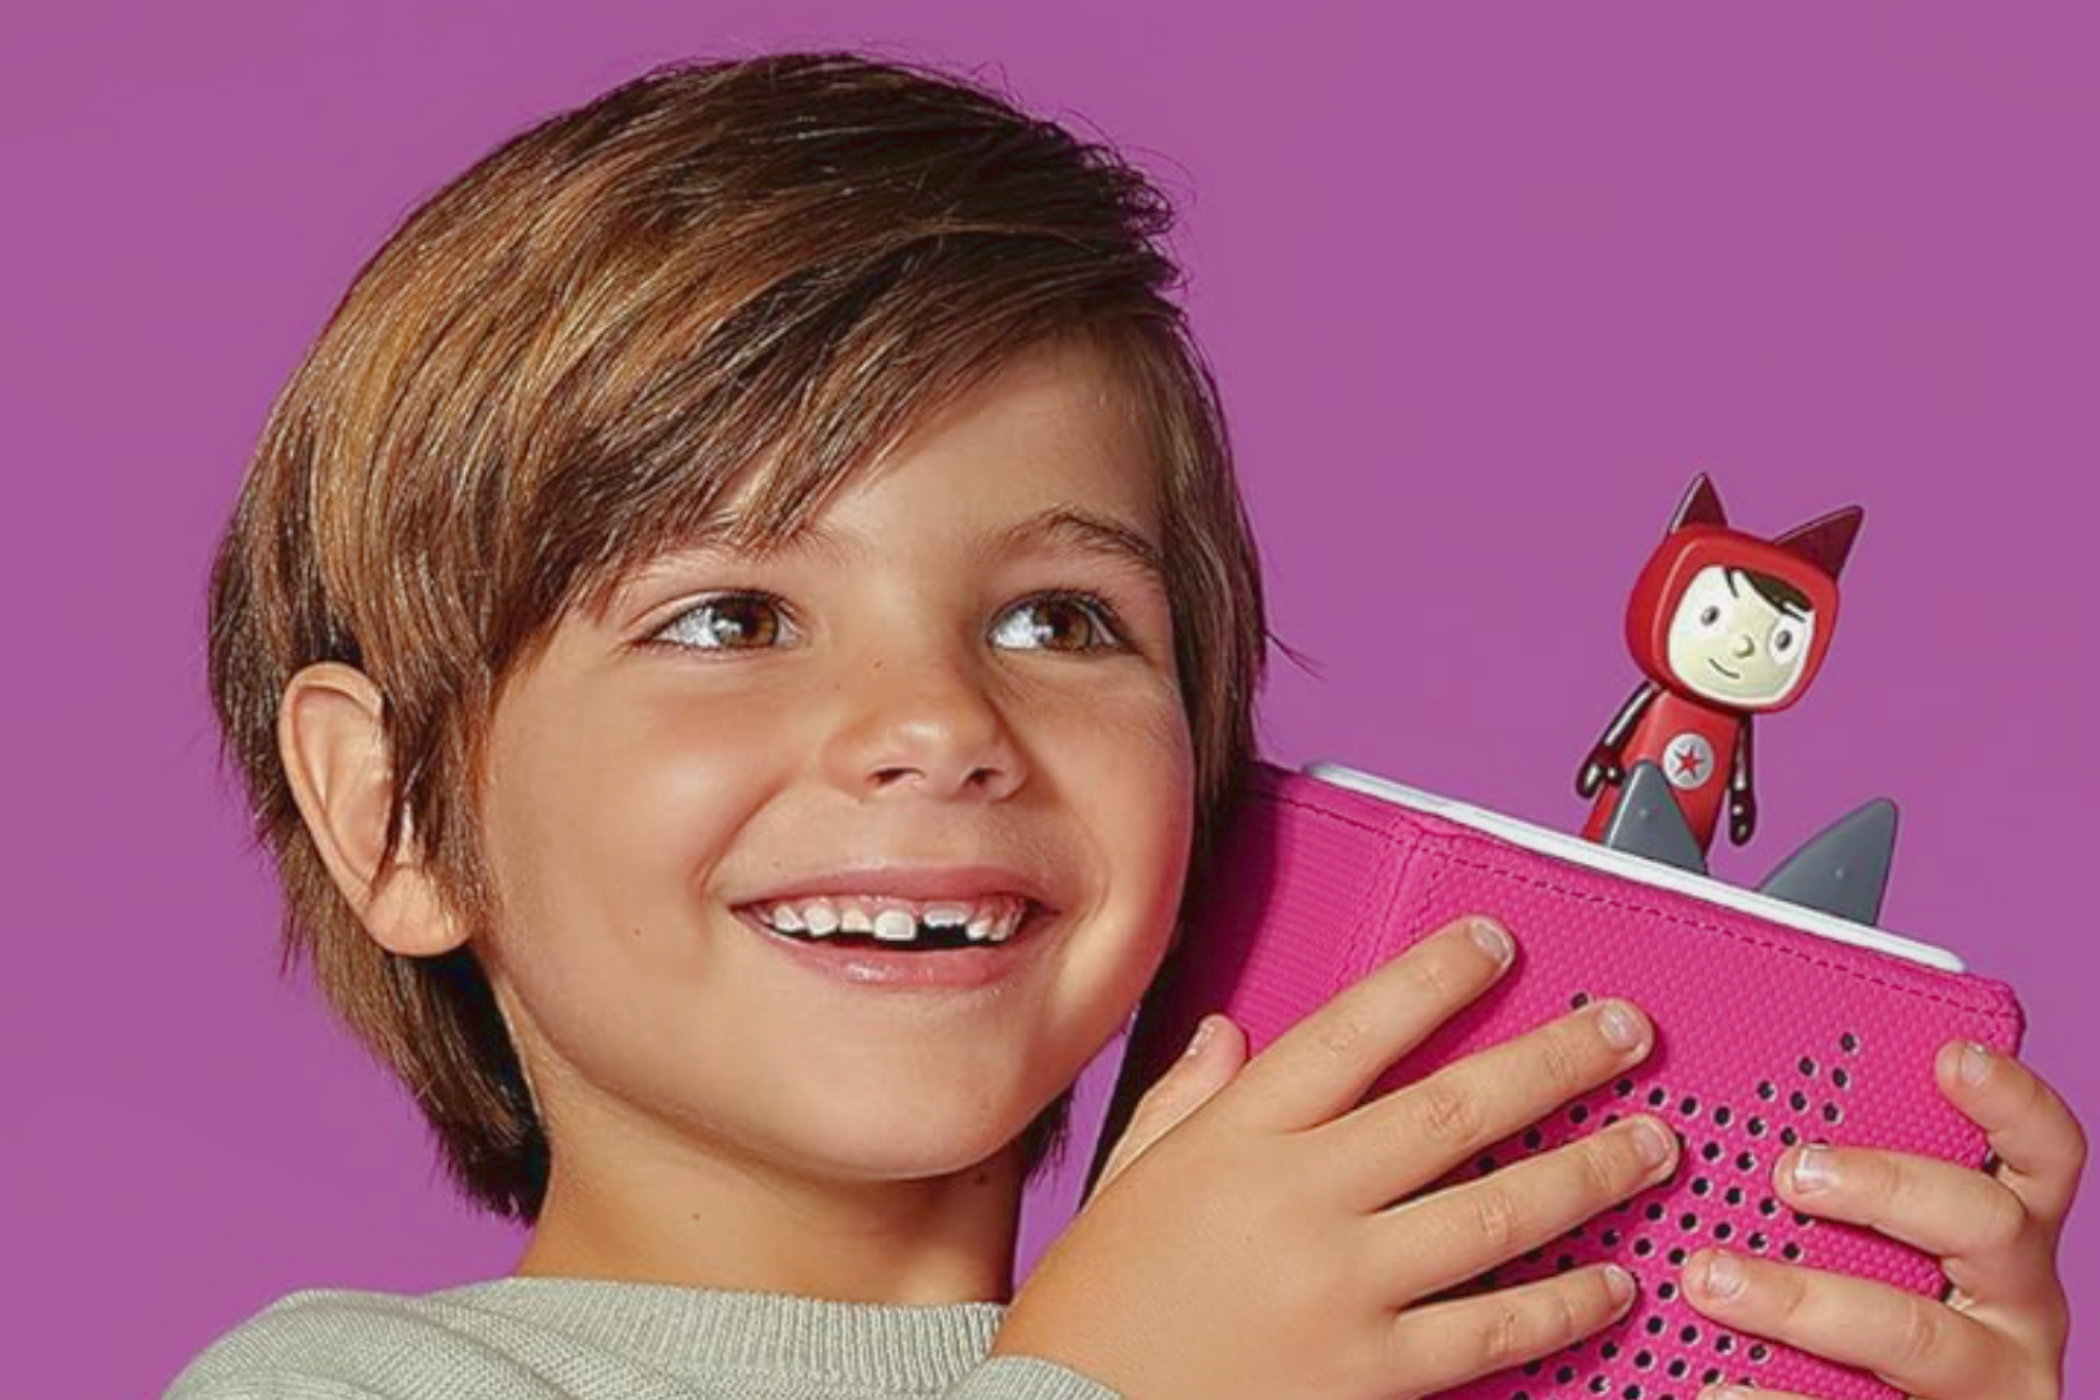 A young boy smiling and holding a Toniebox Audio Player Starter Set